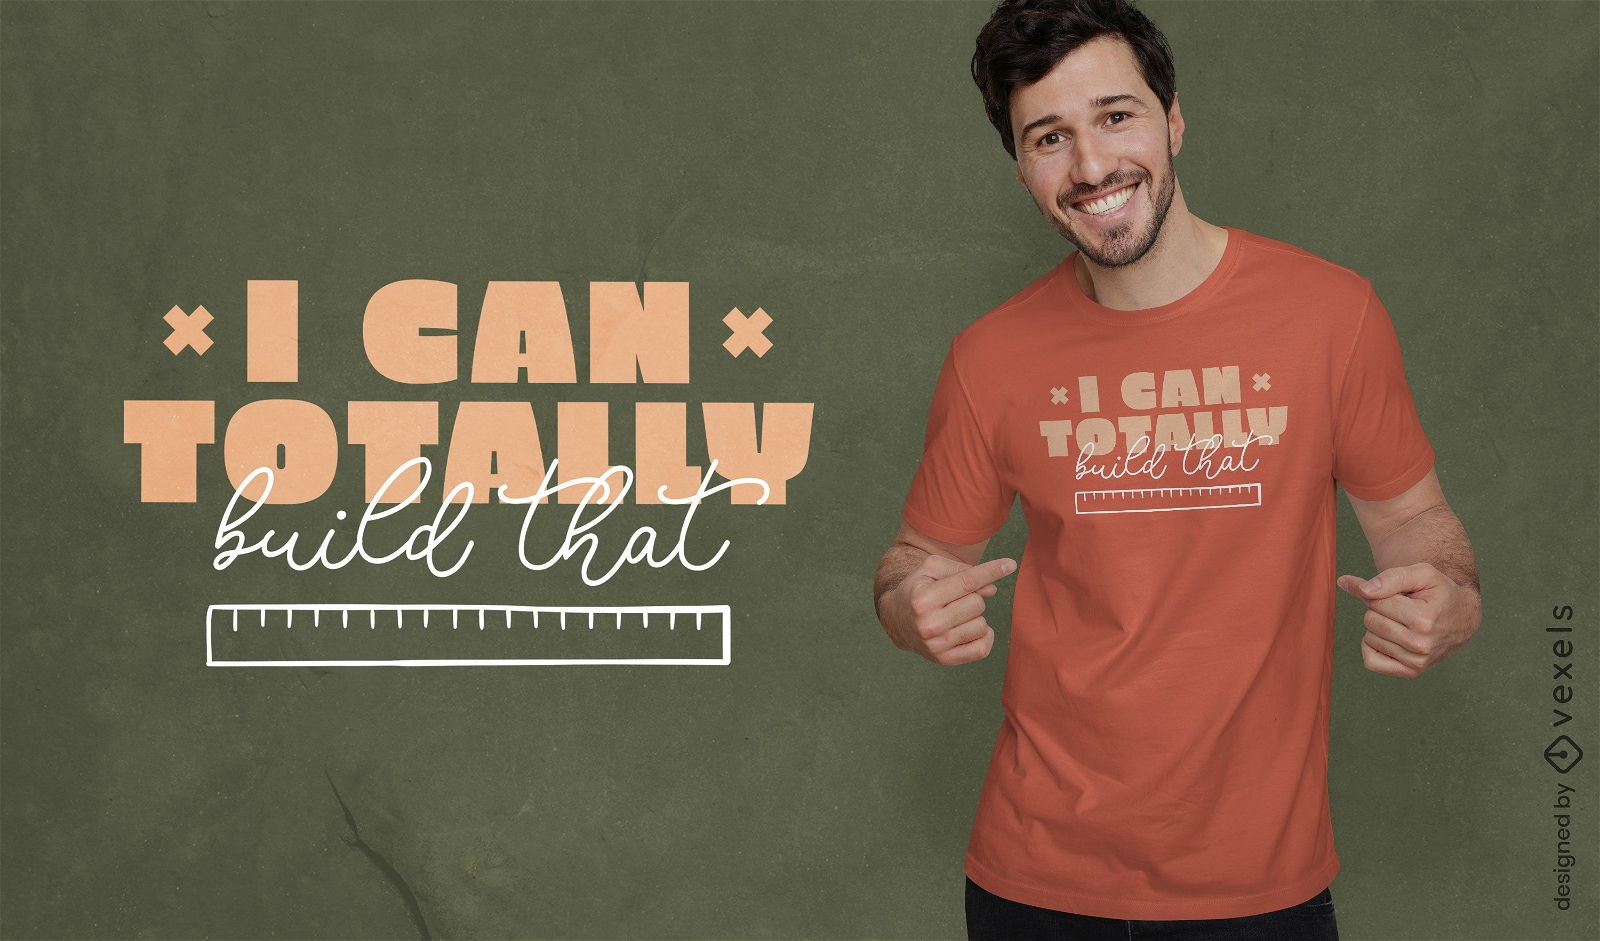 I can build that home interior t-shirt design